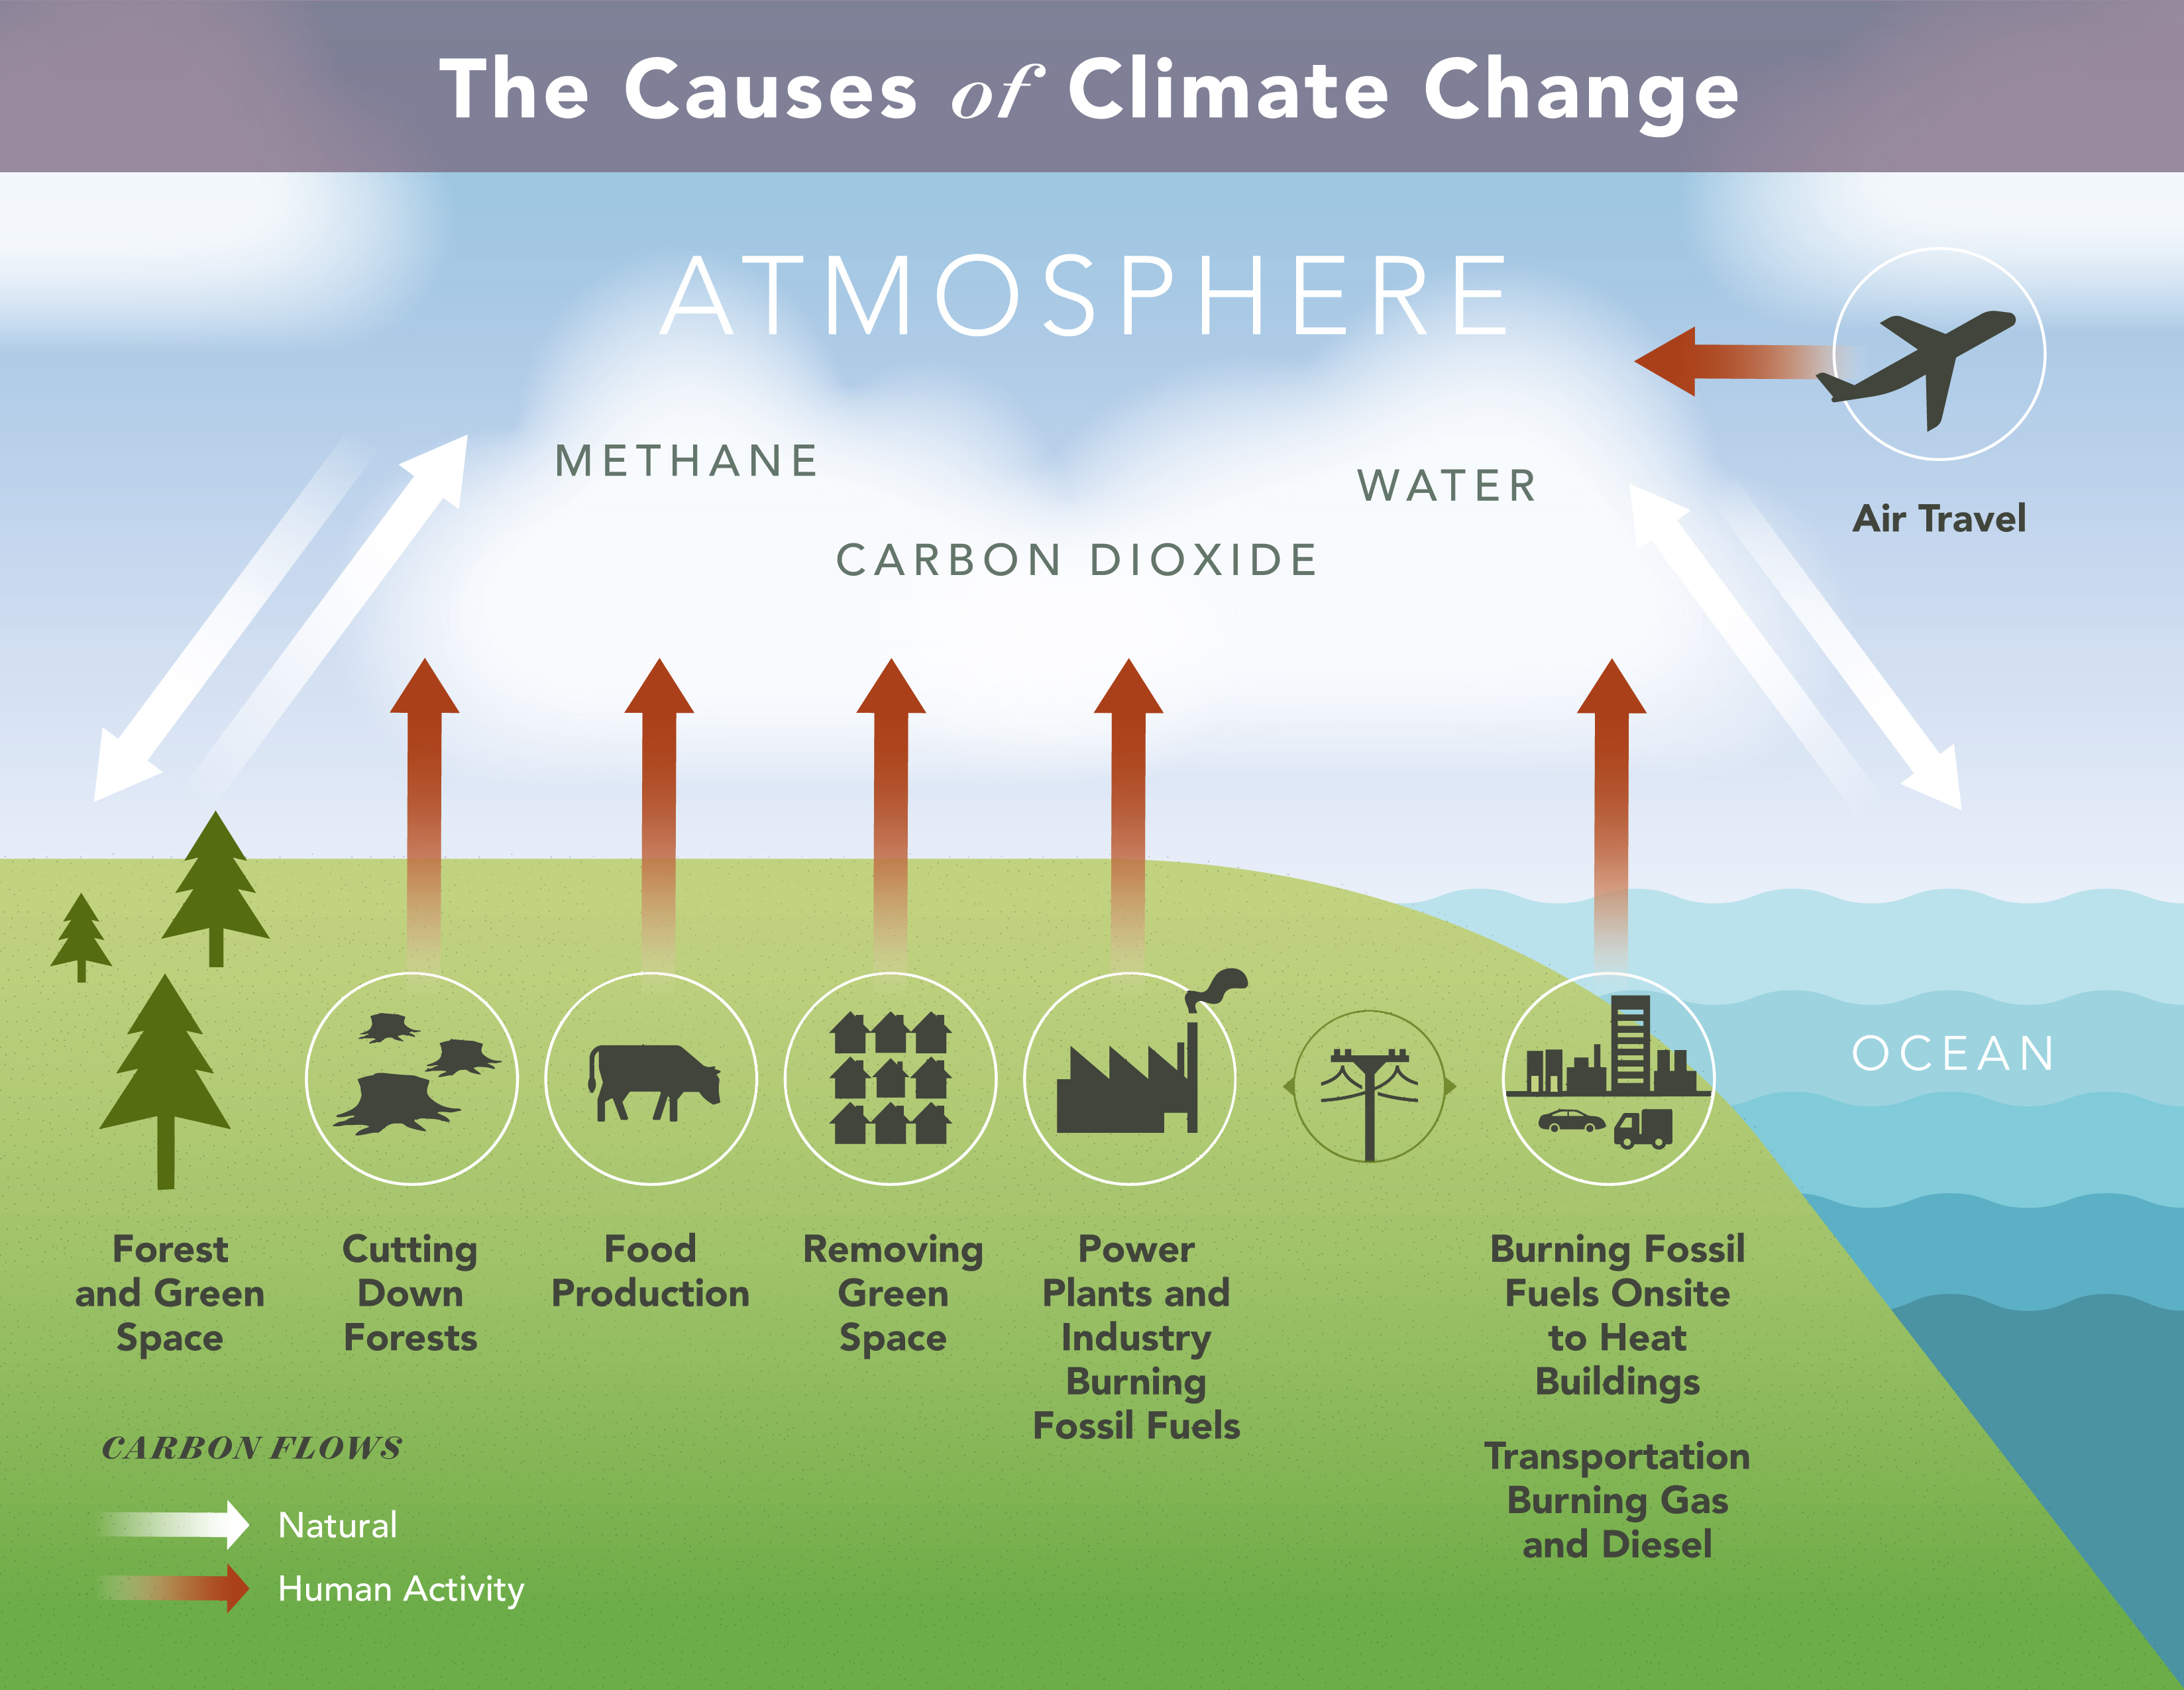 The natural carbon cycle and human activity